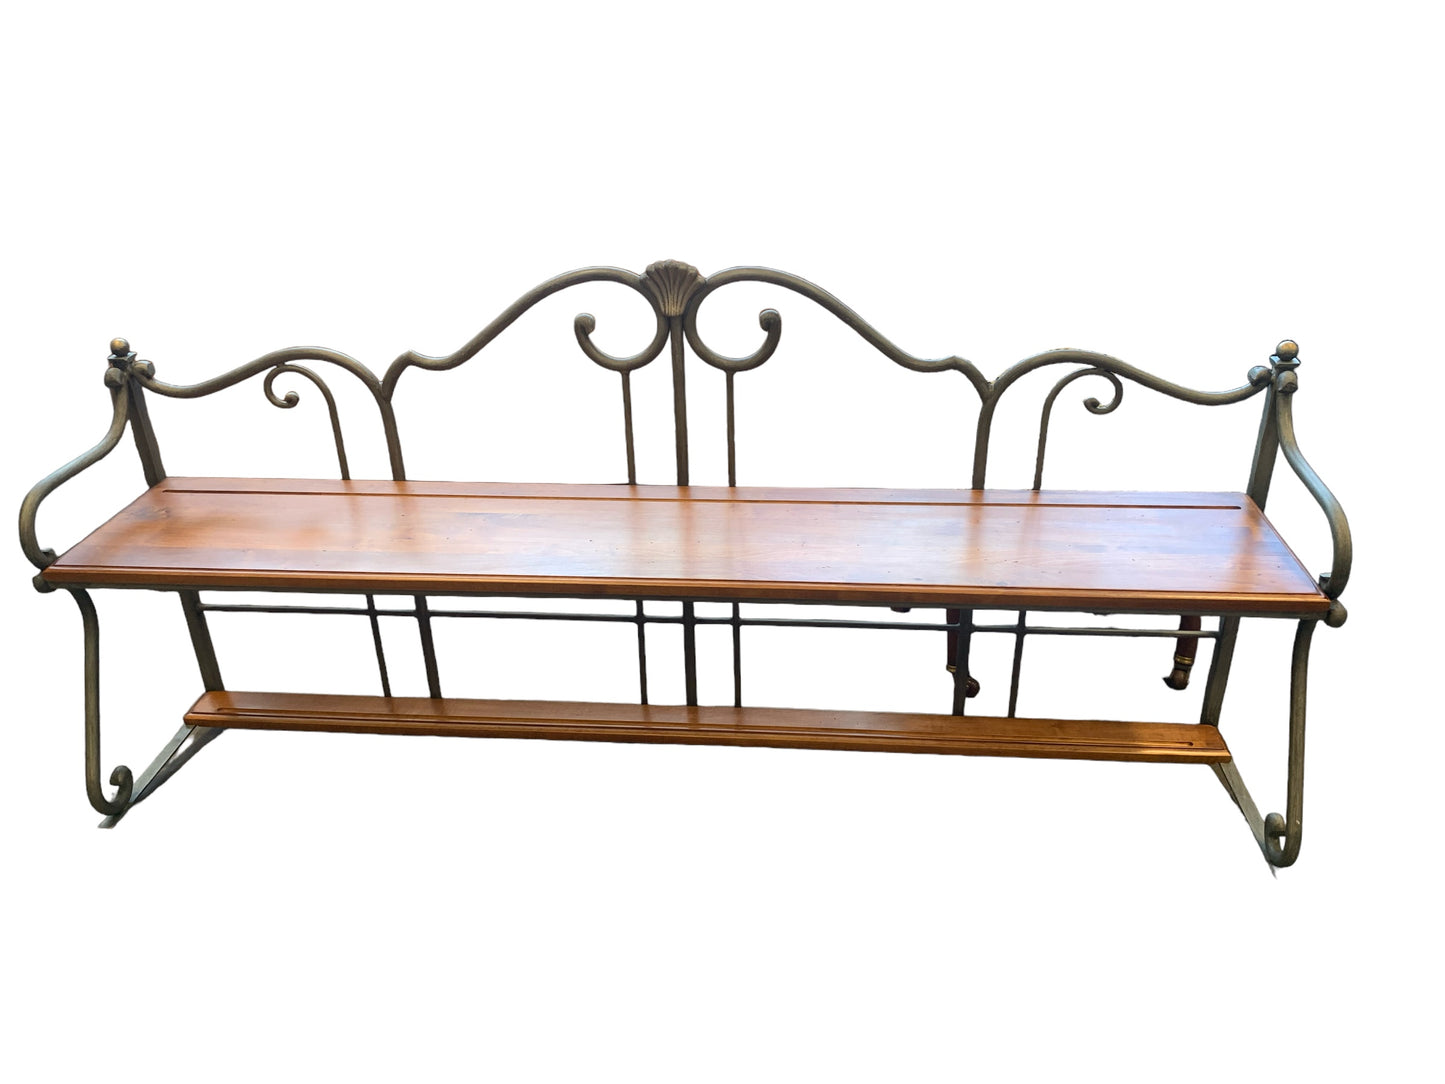 Ethan Allen French Provincial buffet w/ iron rack, 58x19x40" h (w/out rack)